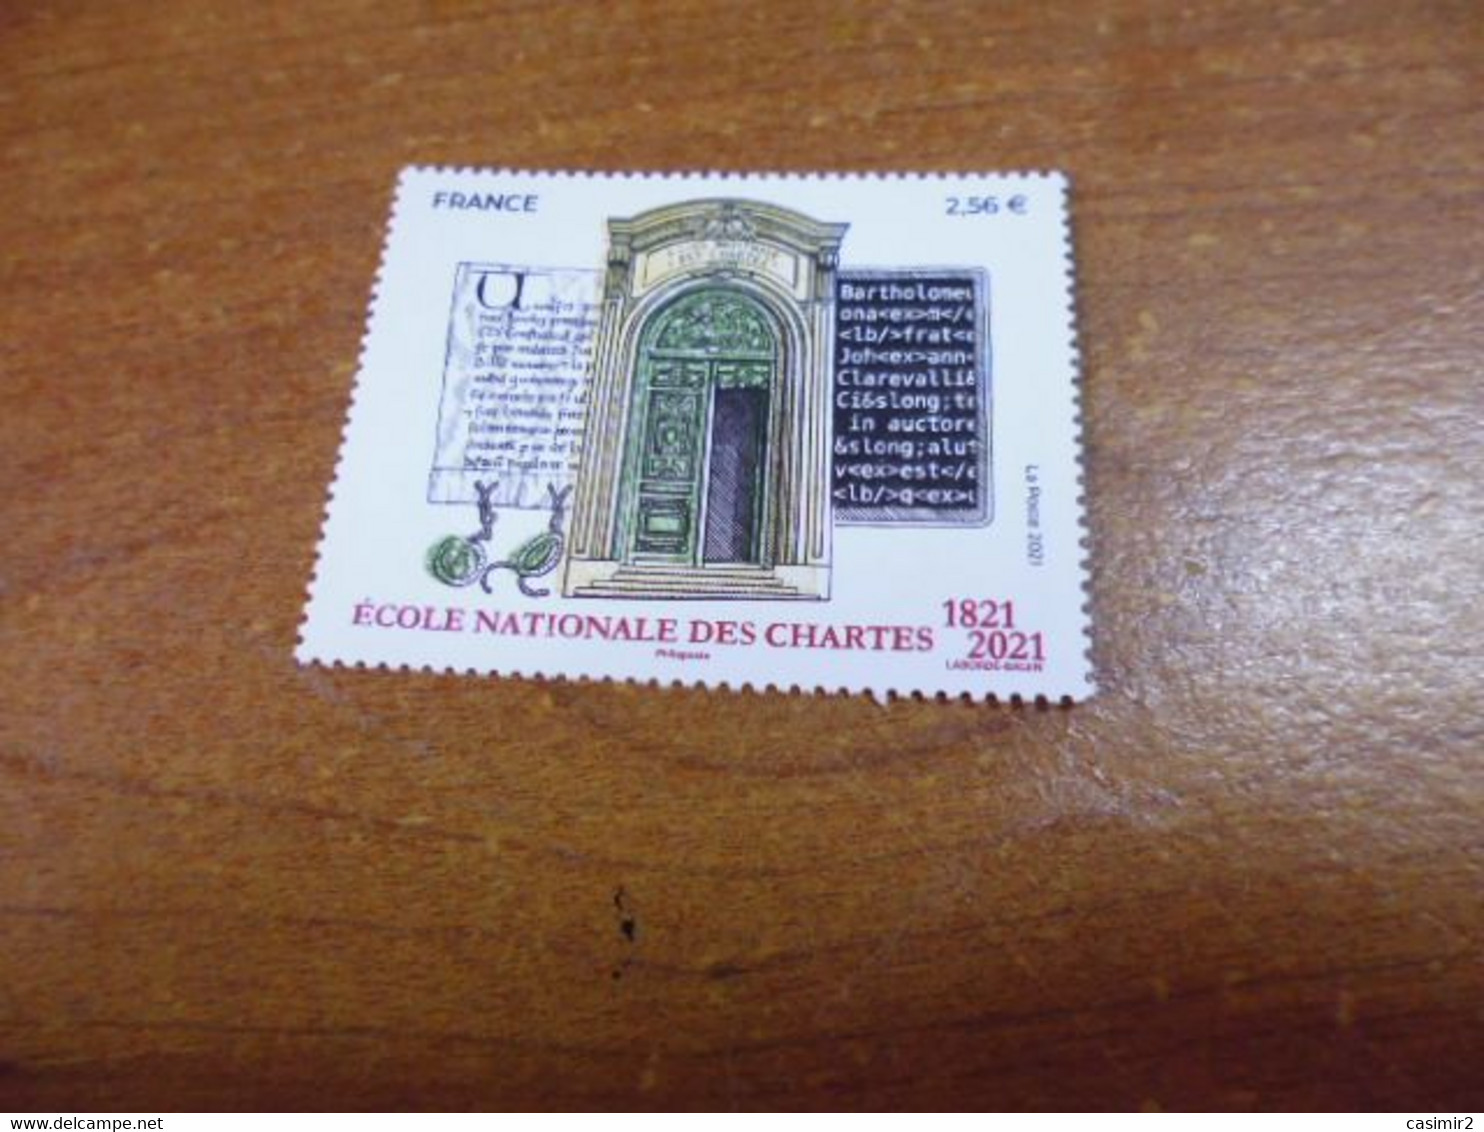 TIMBRE GOMME ORIGINE ECOLE CHARTRES YVERT N° 5472 - Unused Stamps